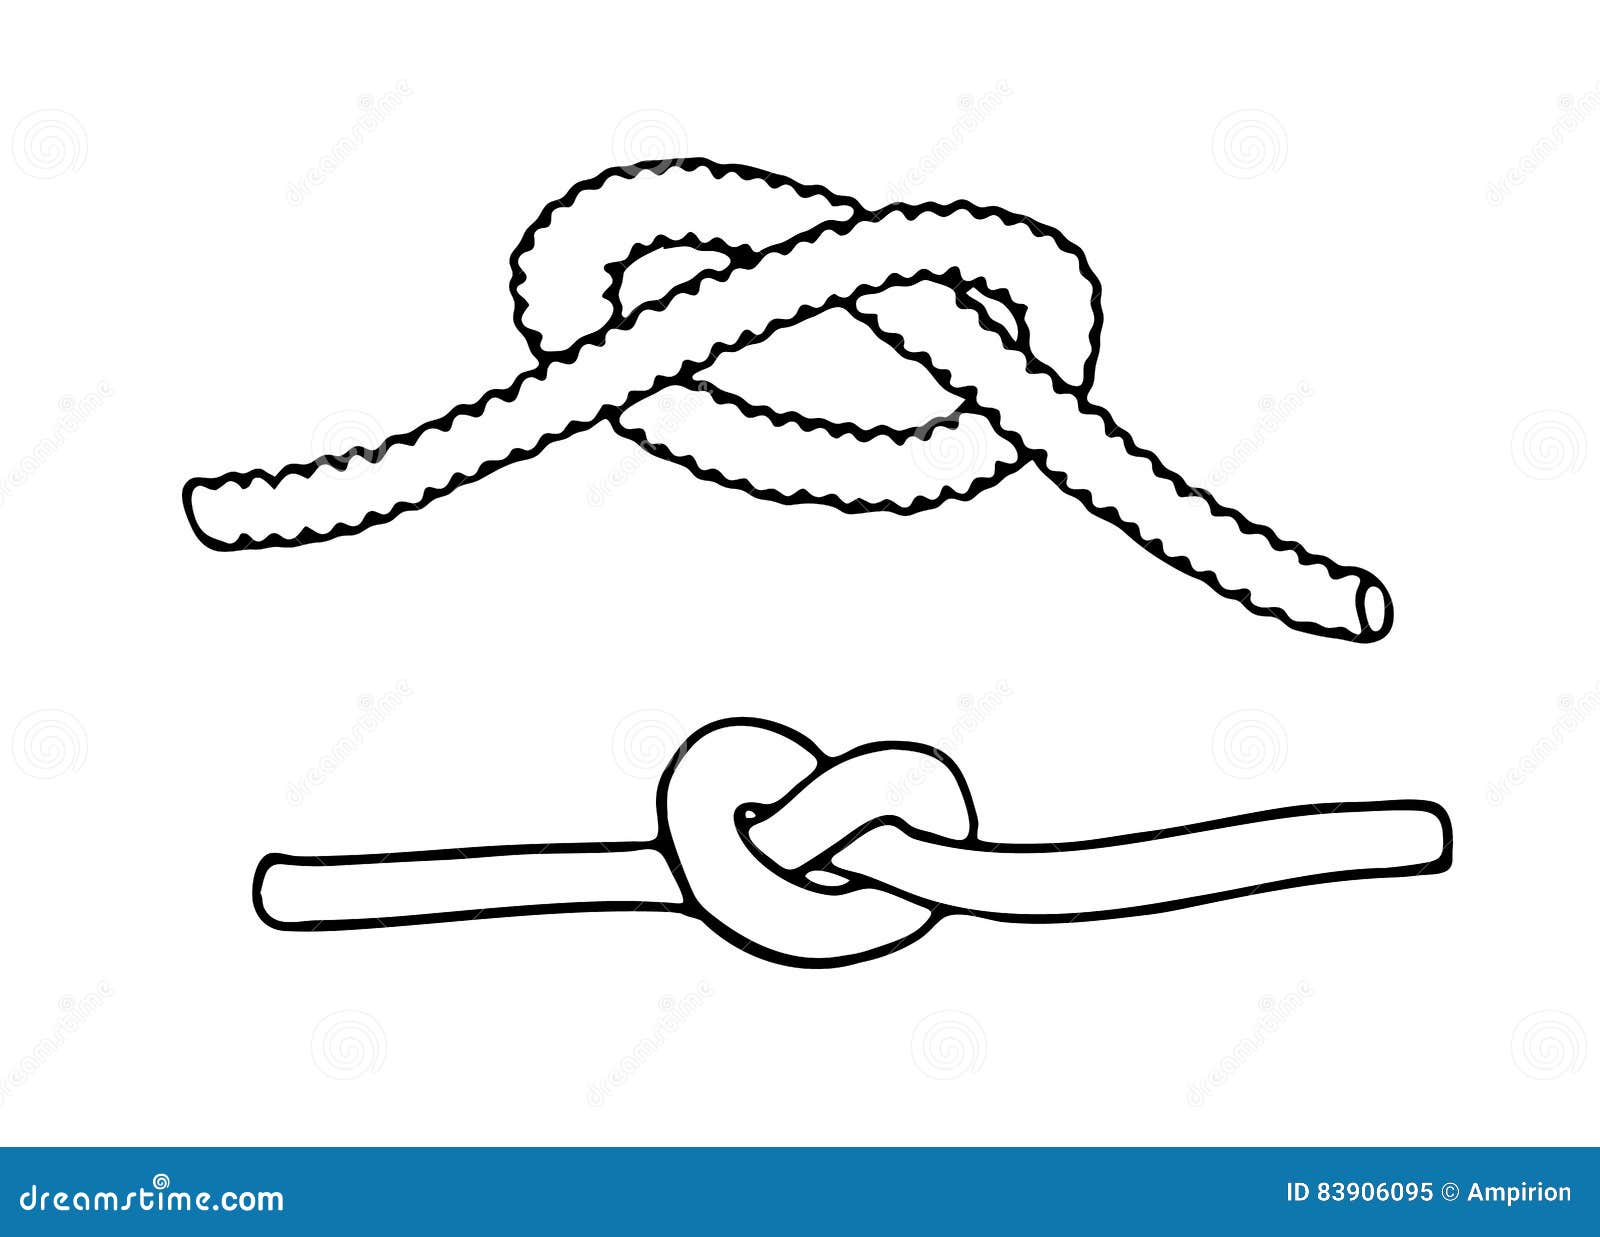 A Sketch of the Knot from the Rope . Stock Vector - Illustration of sketch,  rope: 83906095